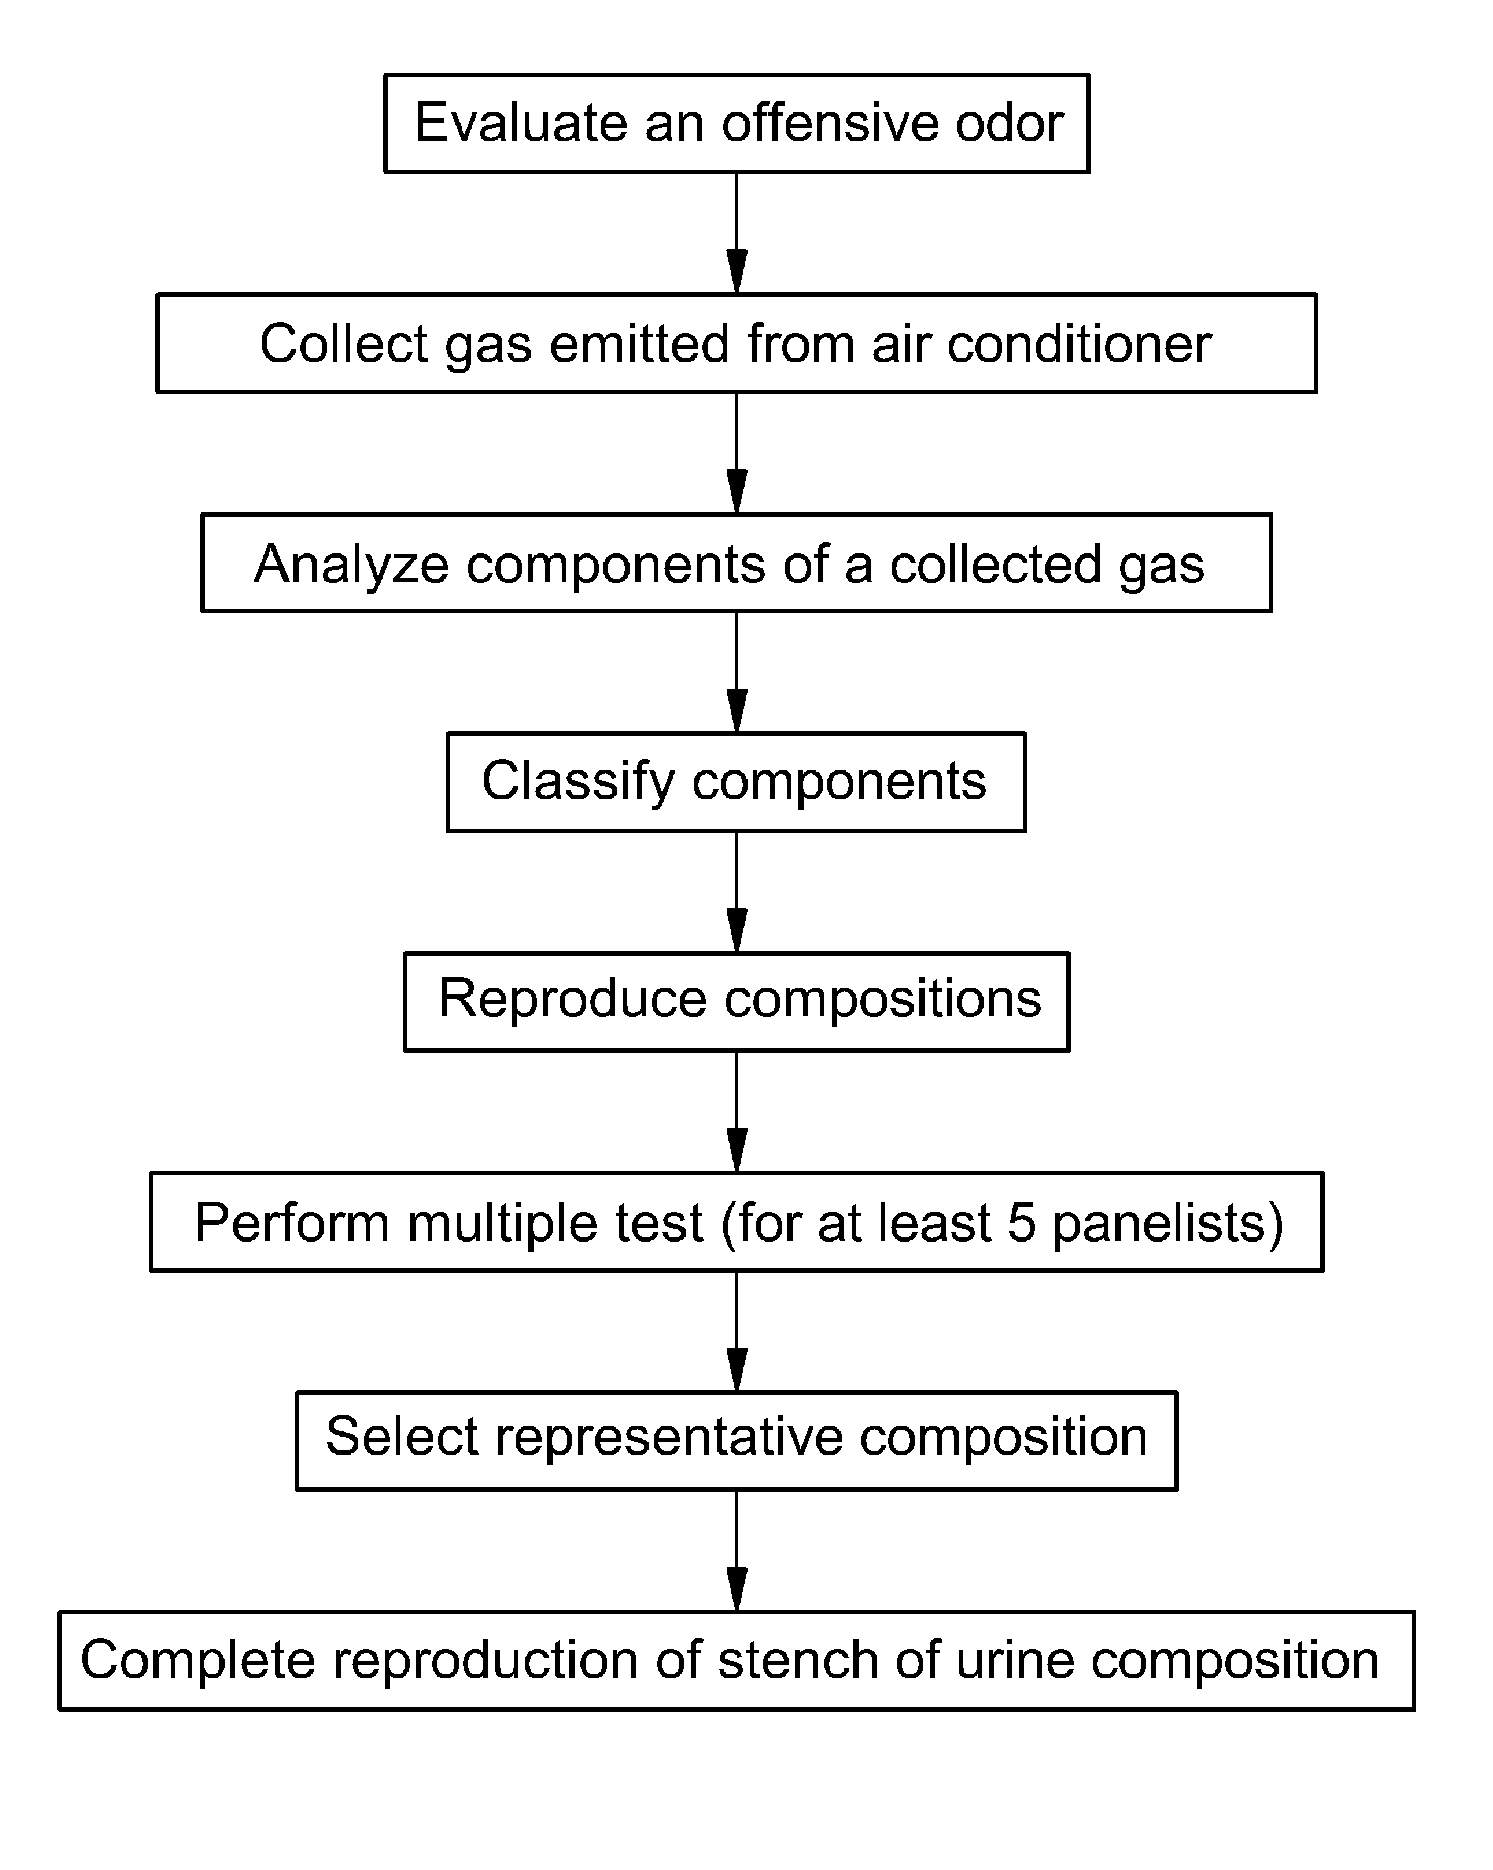 Method for detecting urine odor from air conditioner, reproducing urine odor and preparing corresponding urine odor composition